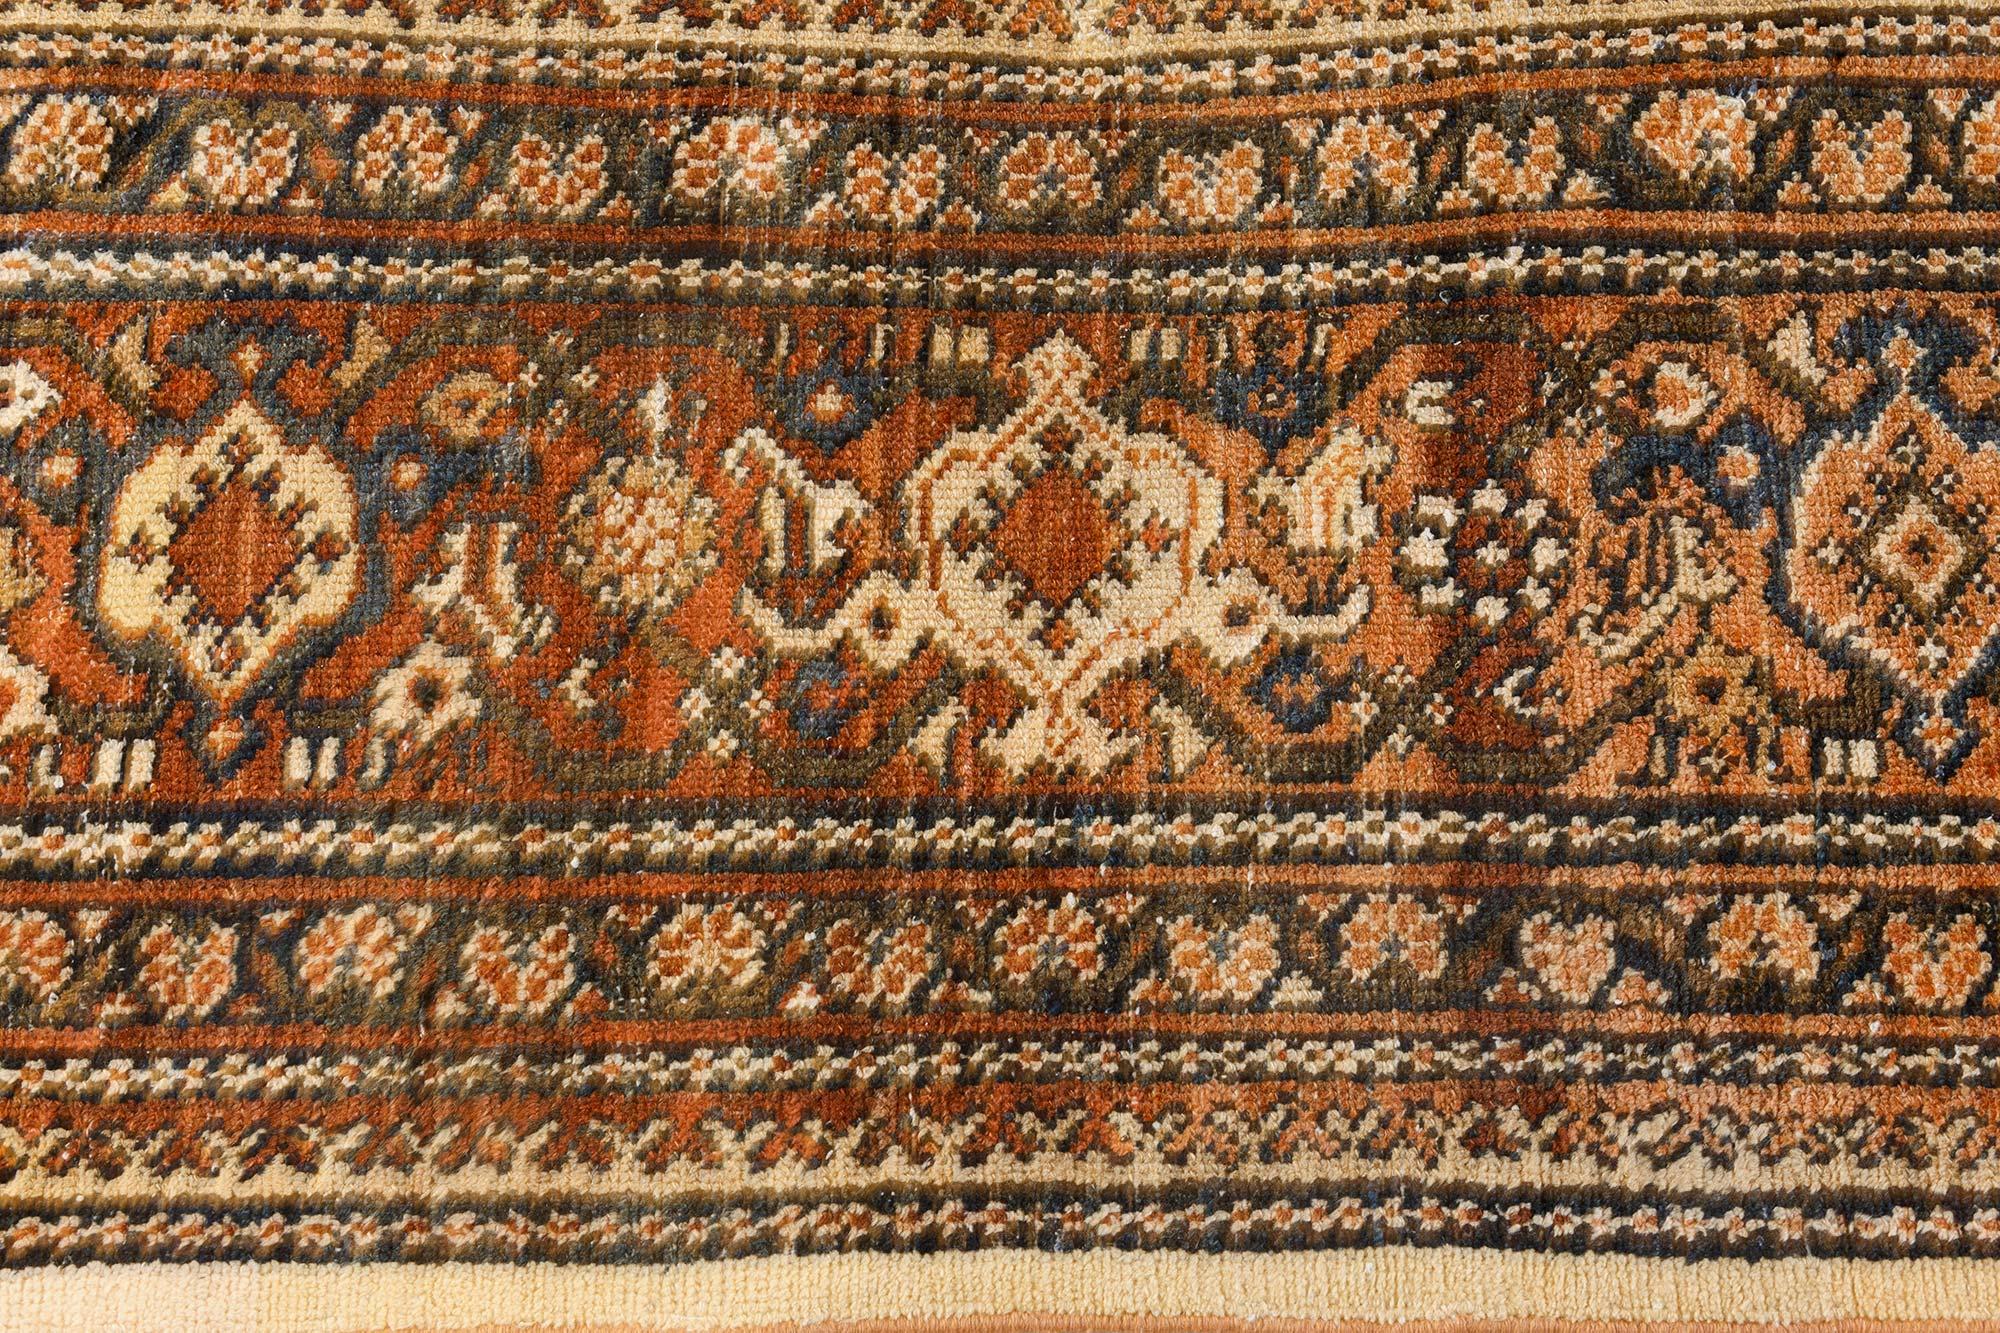 Antique Botanic Persian Sultanabad Wool Carpet In Good Condition For Sale In New York, NY